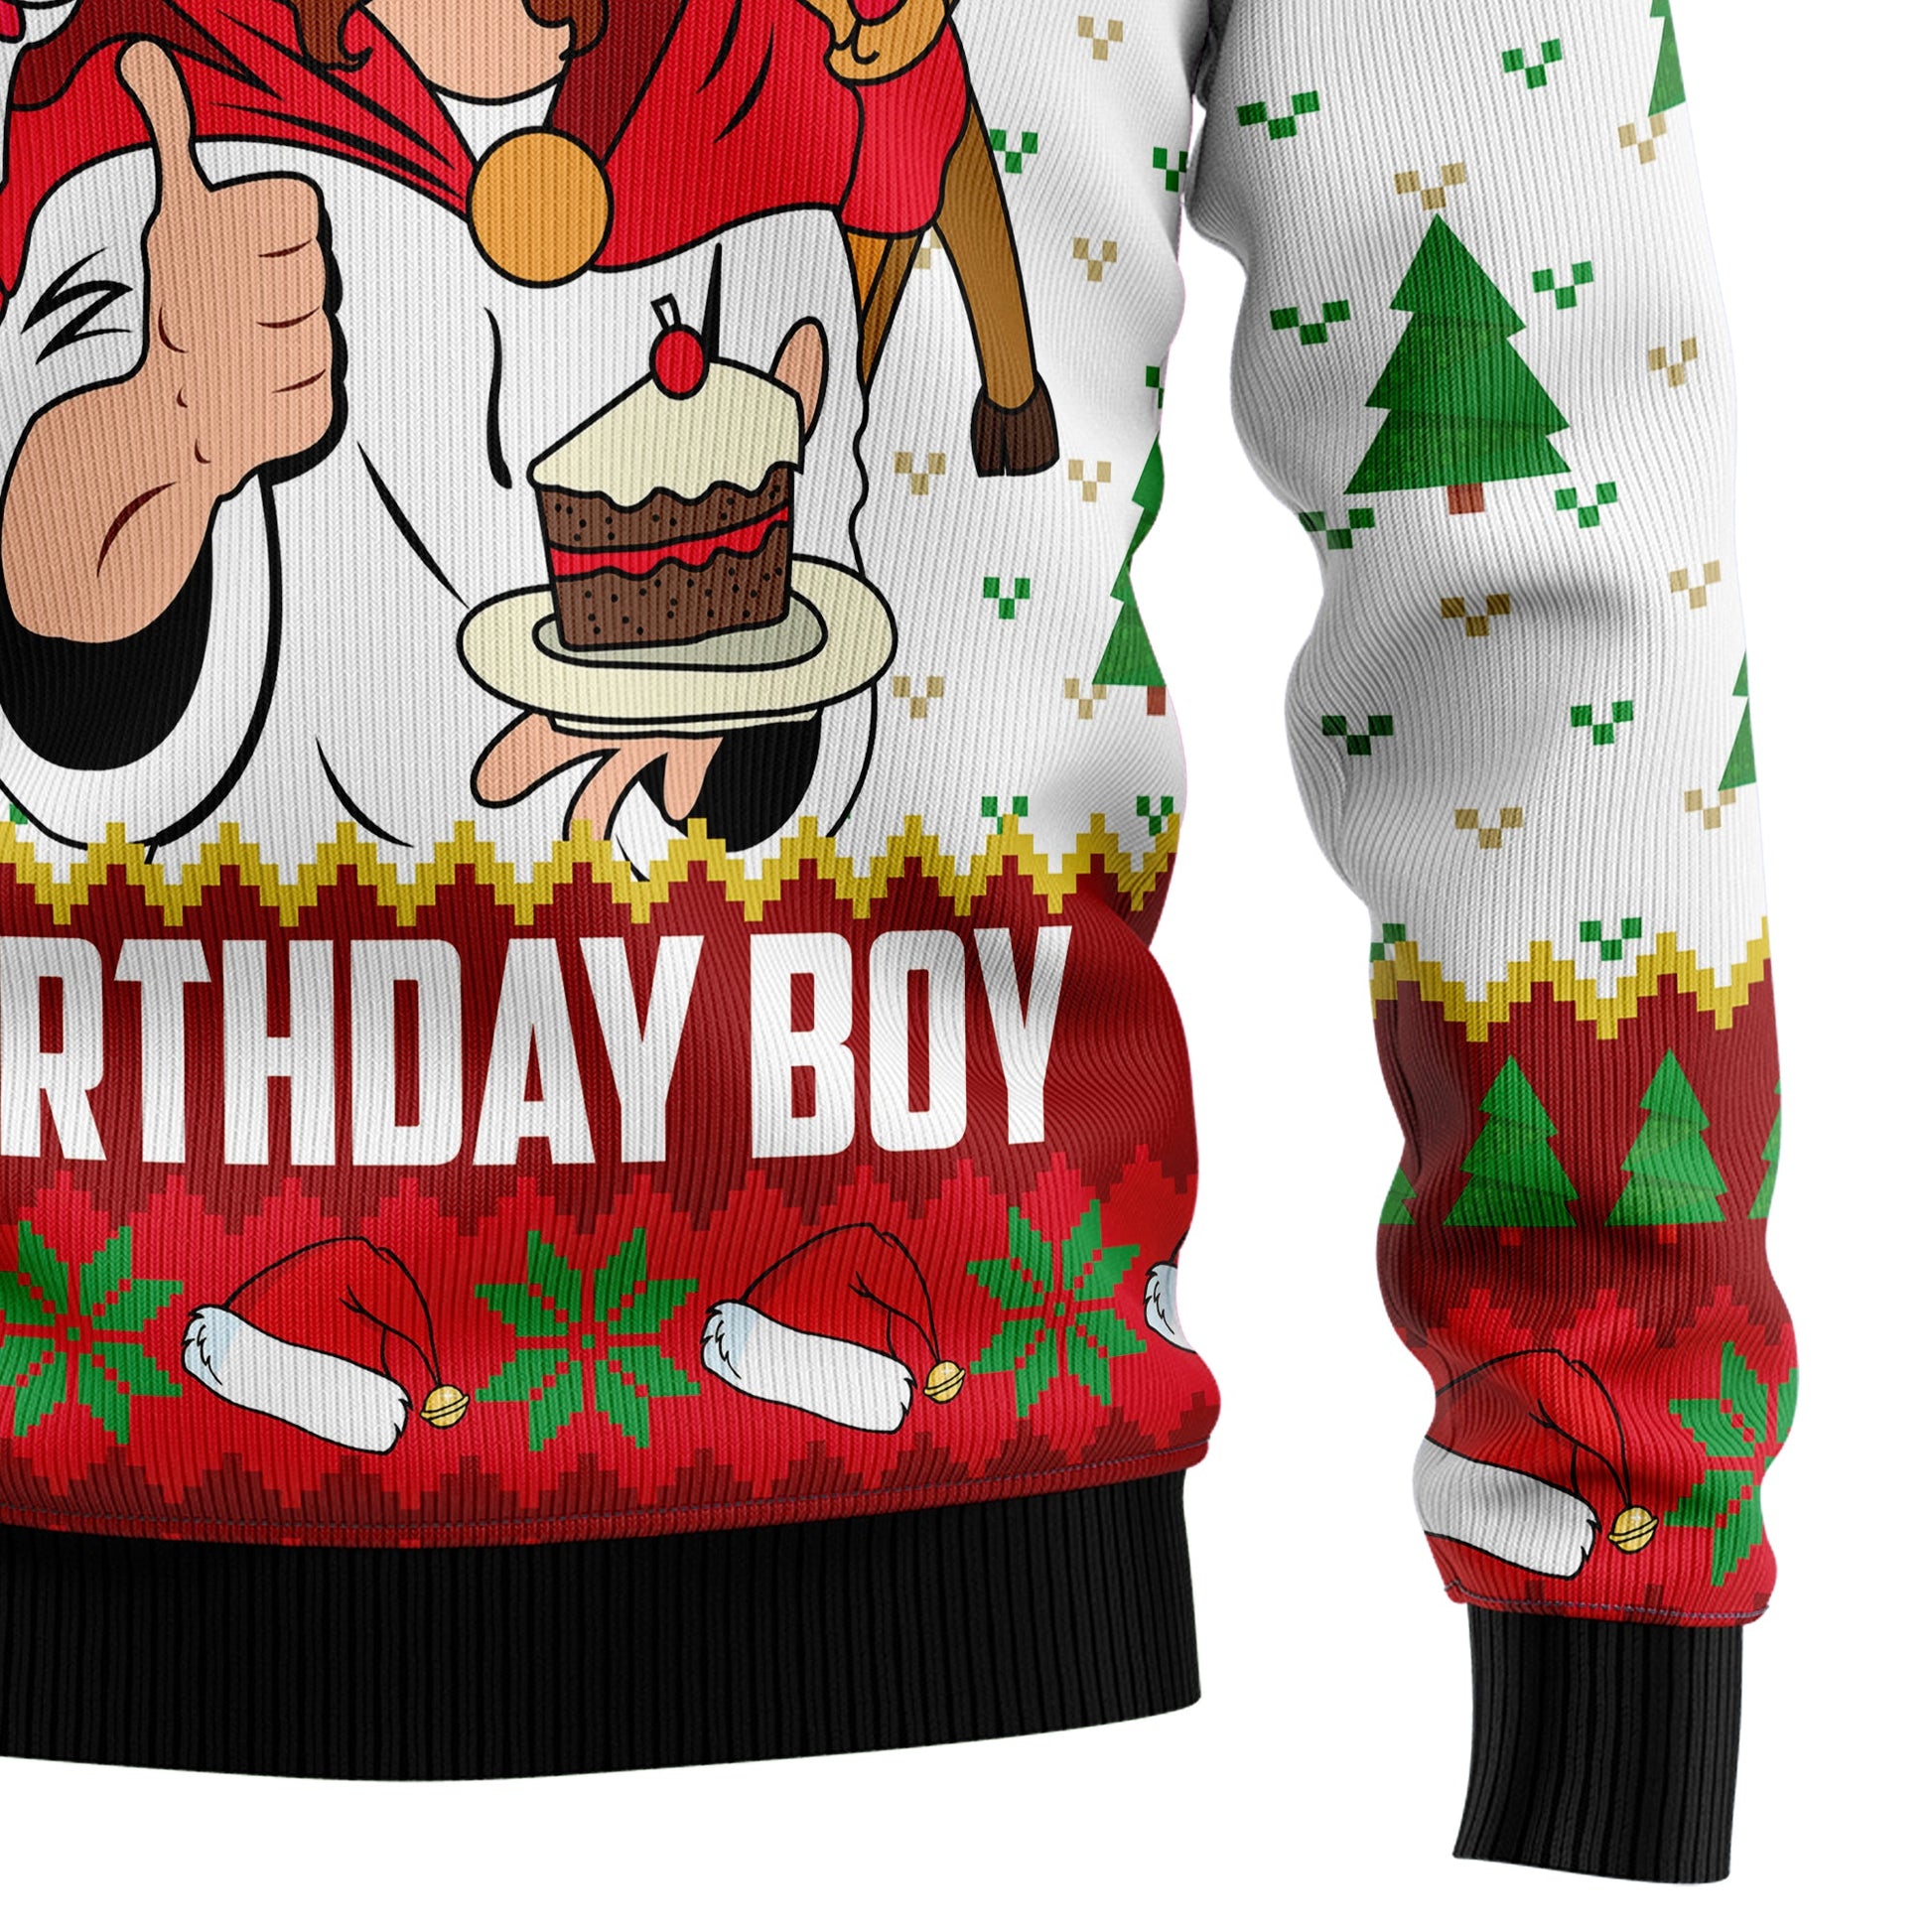 Jesus Birthday Boy Ugly Christmas Sweater - Xmas Gifts For Him Or Her - Christmas Gift For Friends - Jesus Christ Sweater